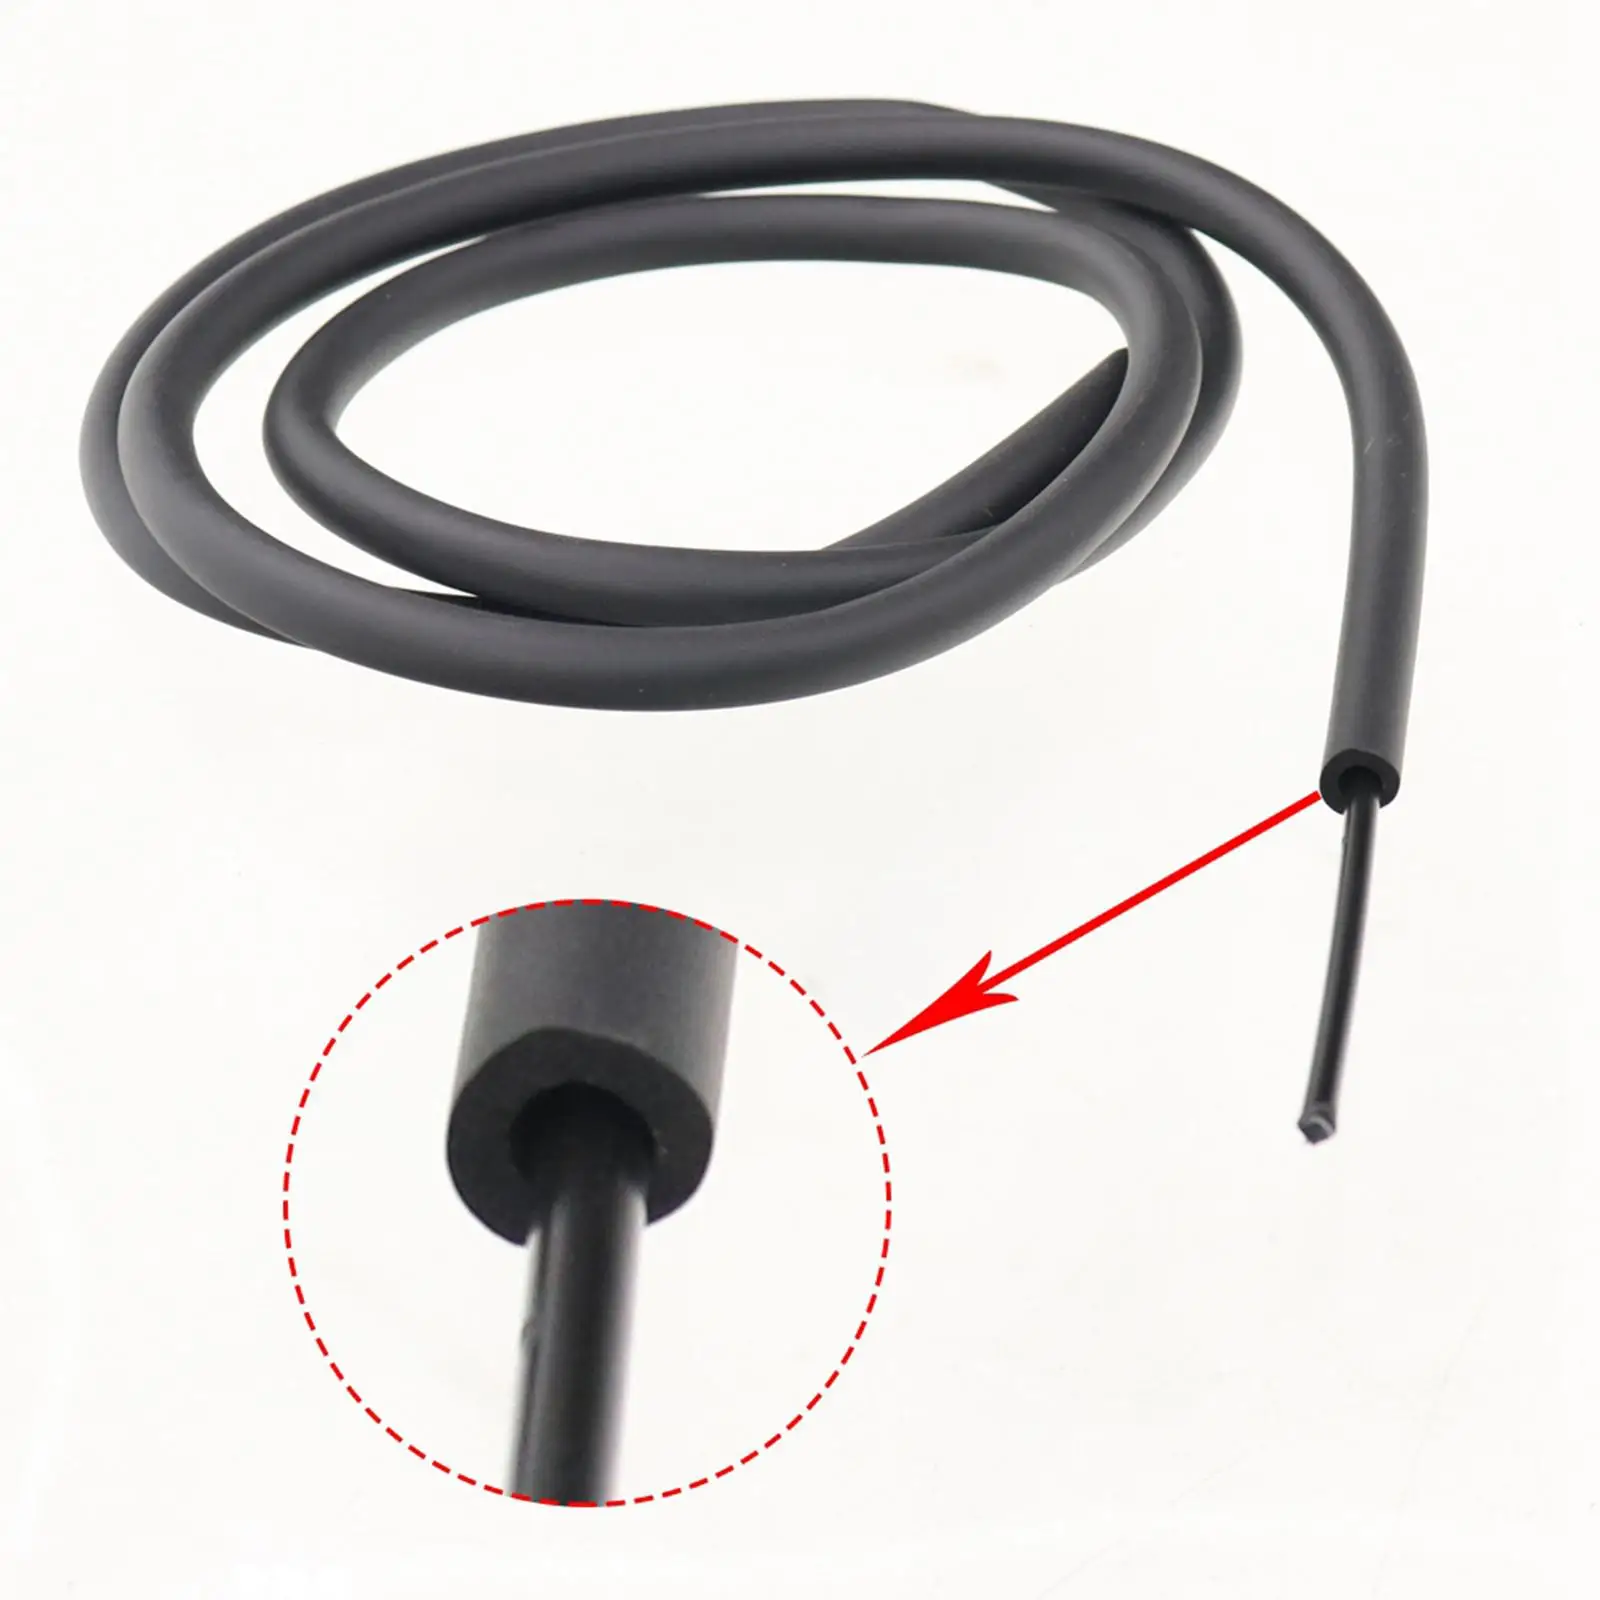 1.15M Bike Bicycle Foam Cable Housing Brake Gear Shift Cable Protective Foam MTB Road Bike Cable Parts Accessories